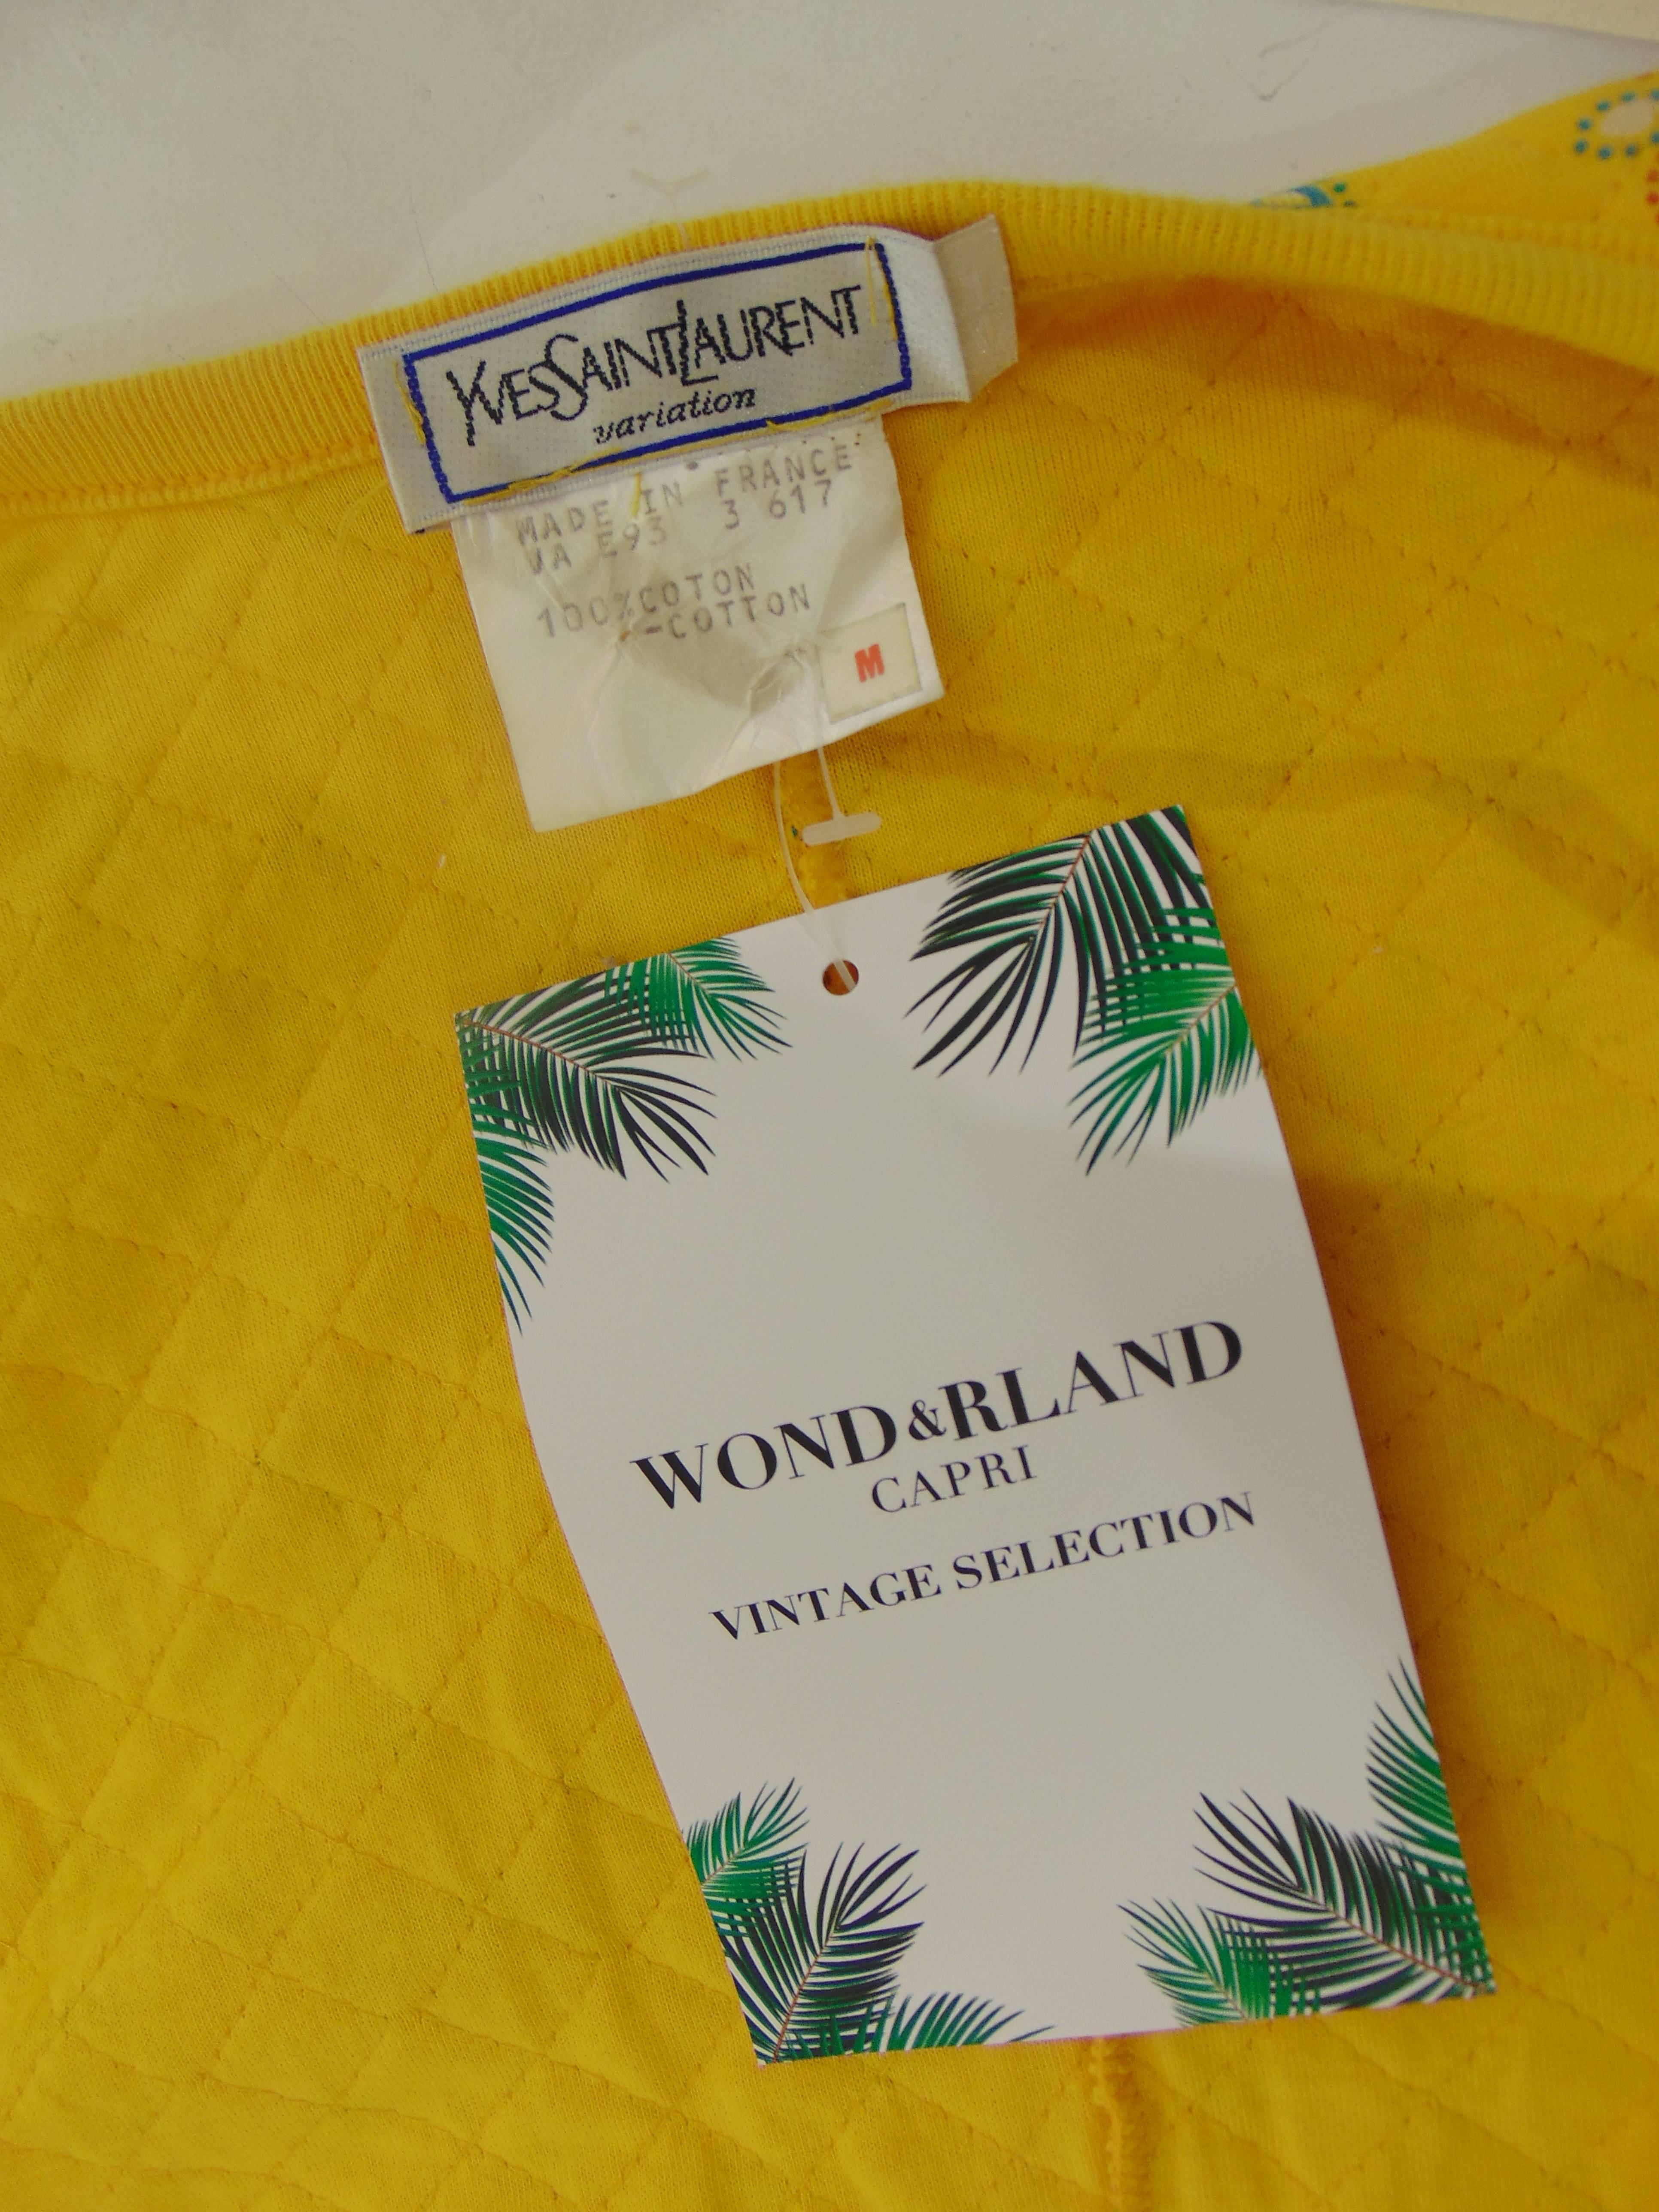 Yves Saint Laurent Variation Cotton yellow flowers skirt suit In Good Condition For Sale In Capri, IT